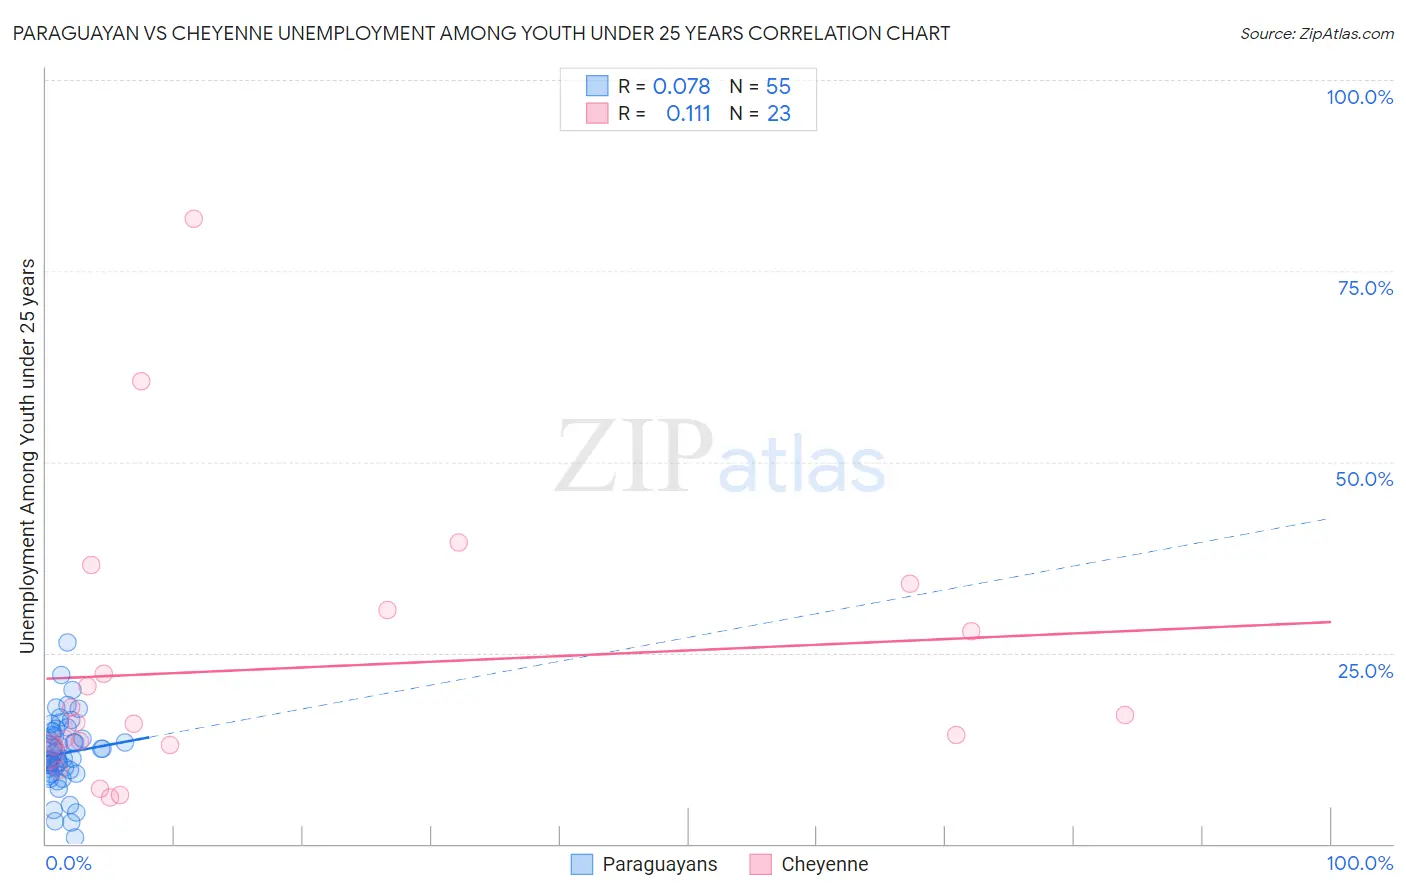 Paraguayan vs Cheyenne Unemployment Among Youth under 25 years